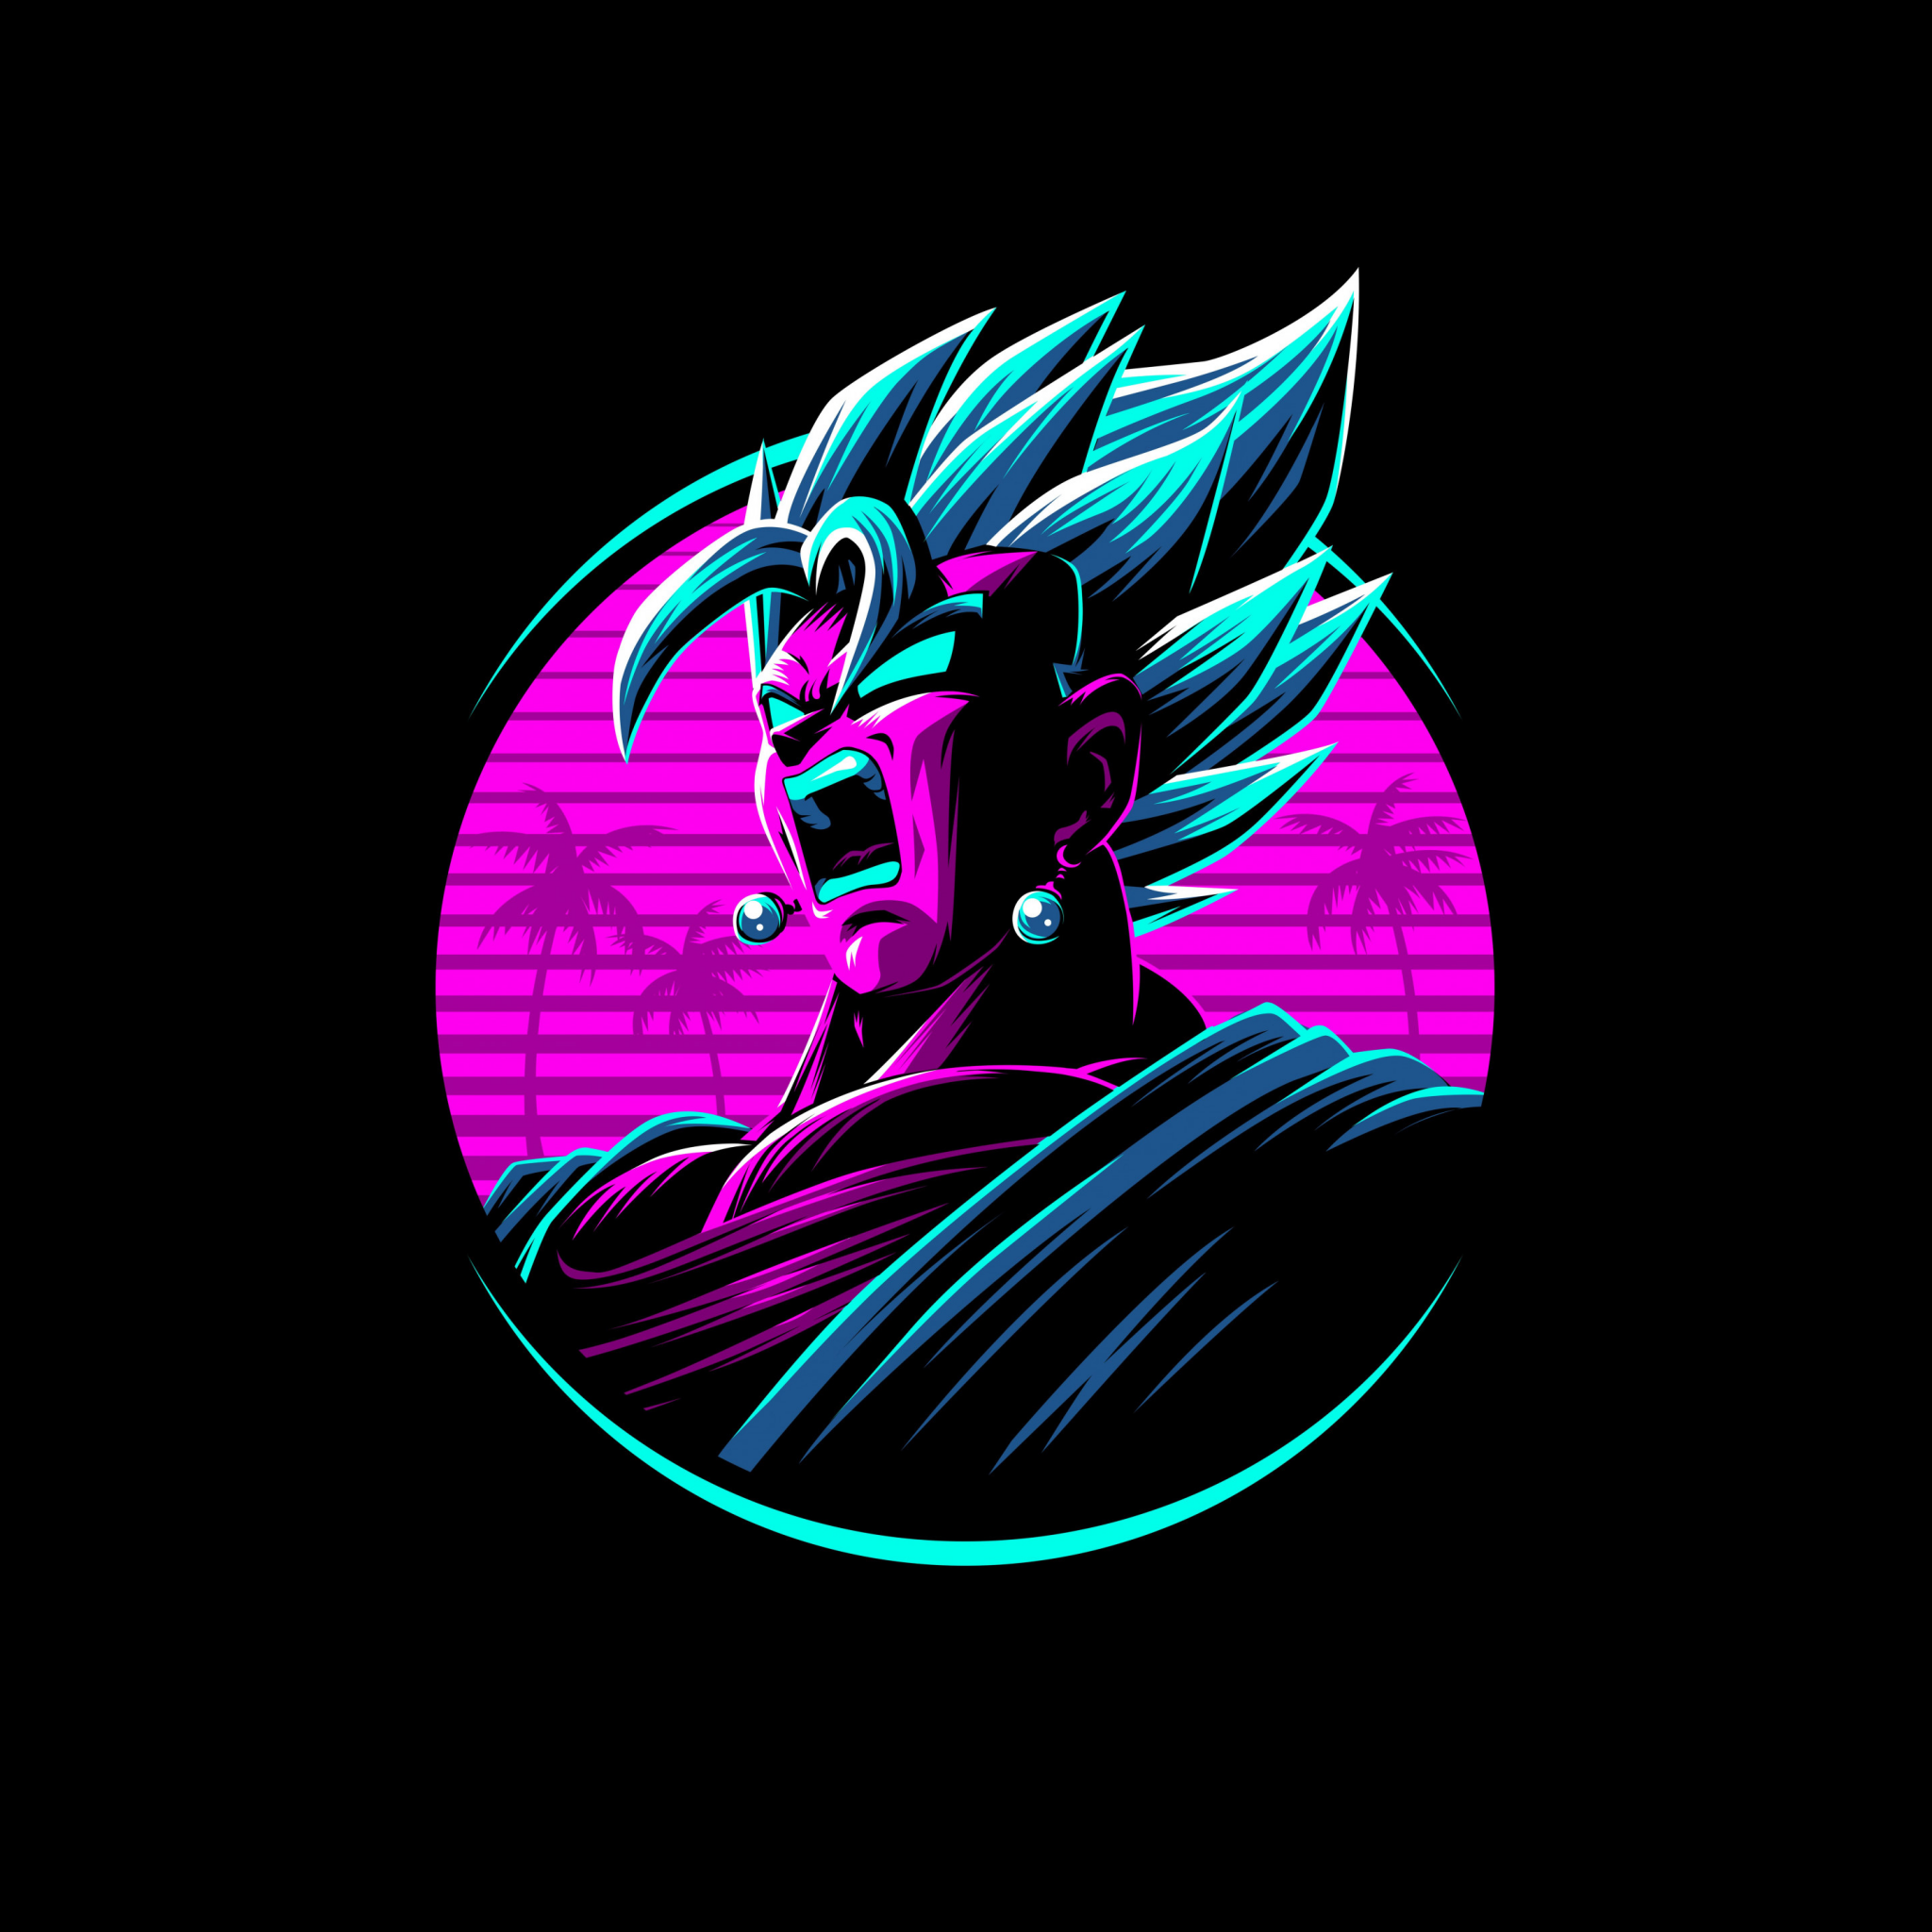 30+ Vegito Wallpapers for iPhone and Android by Michael Hamilton